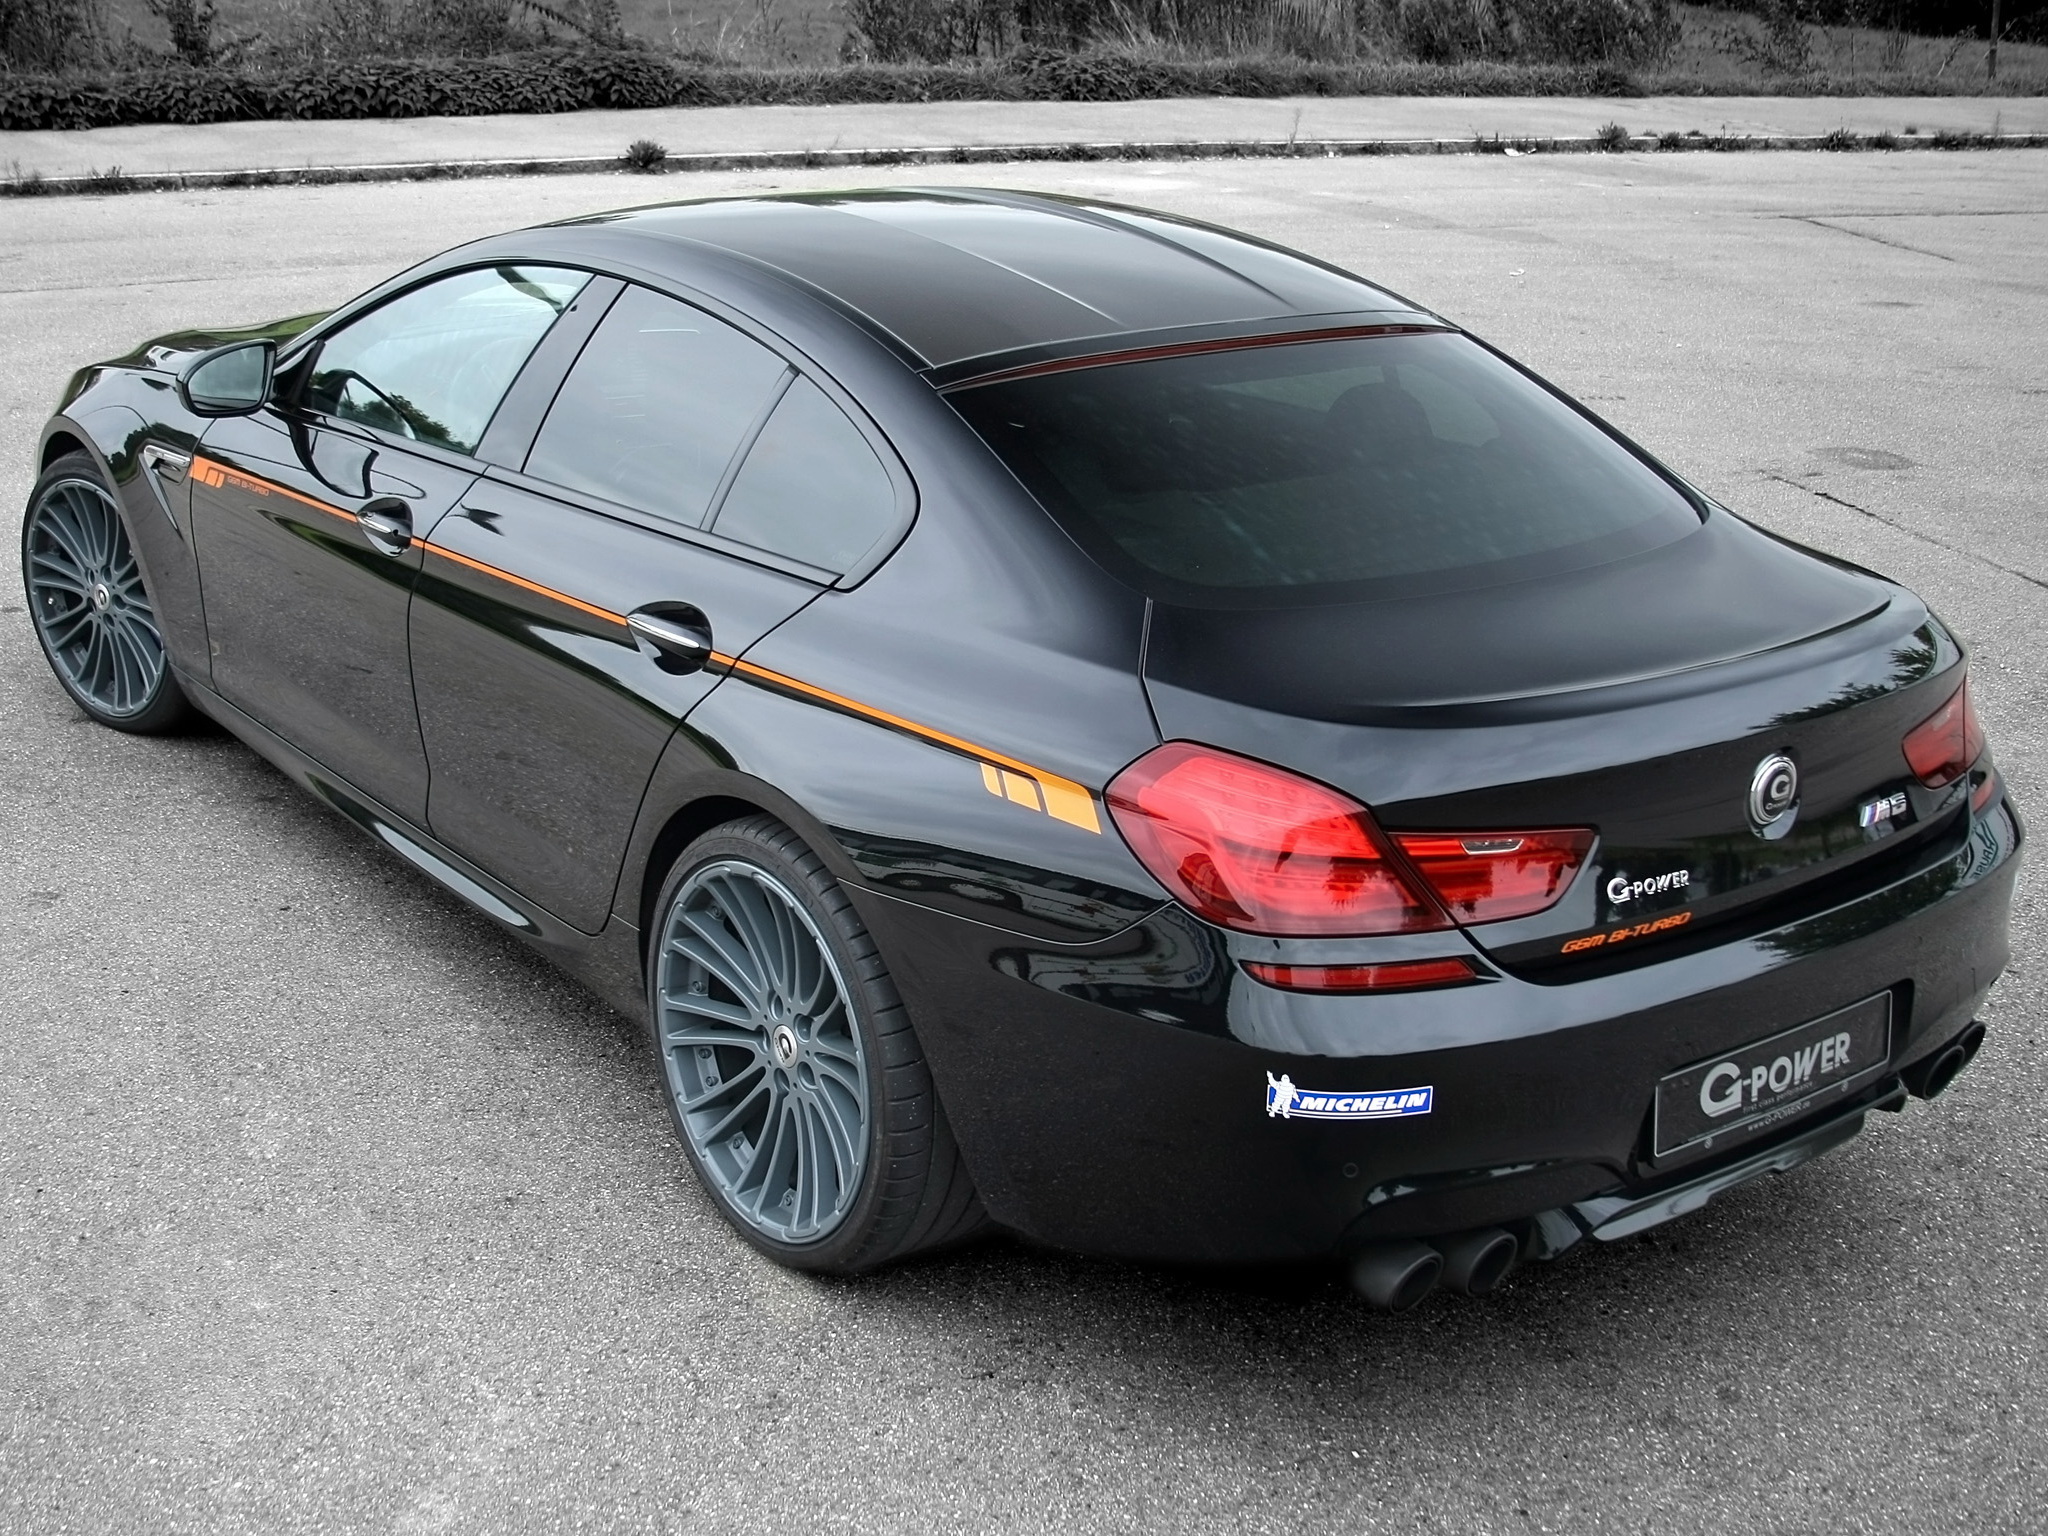 2013, G power, Bmw, M6, Gran, Coupe,  f06 , Tuning, M 6 Wallpaper